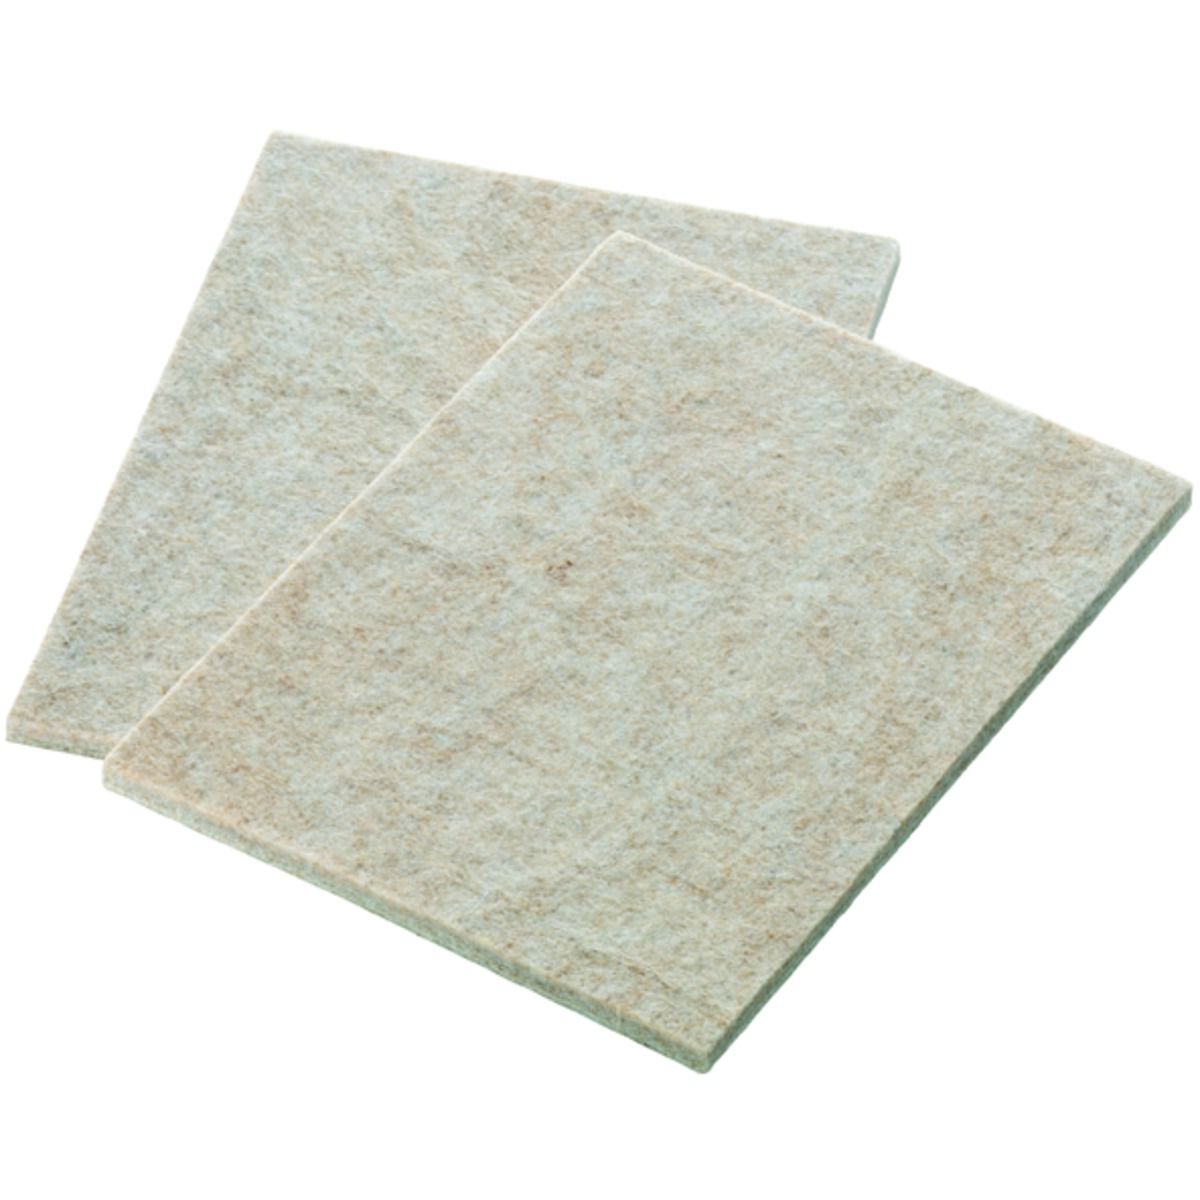 Image of Wickes Heavy Duty Self-Adhesive Felt Pads - Pack of 2